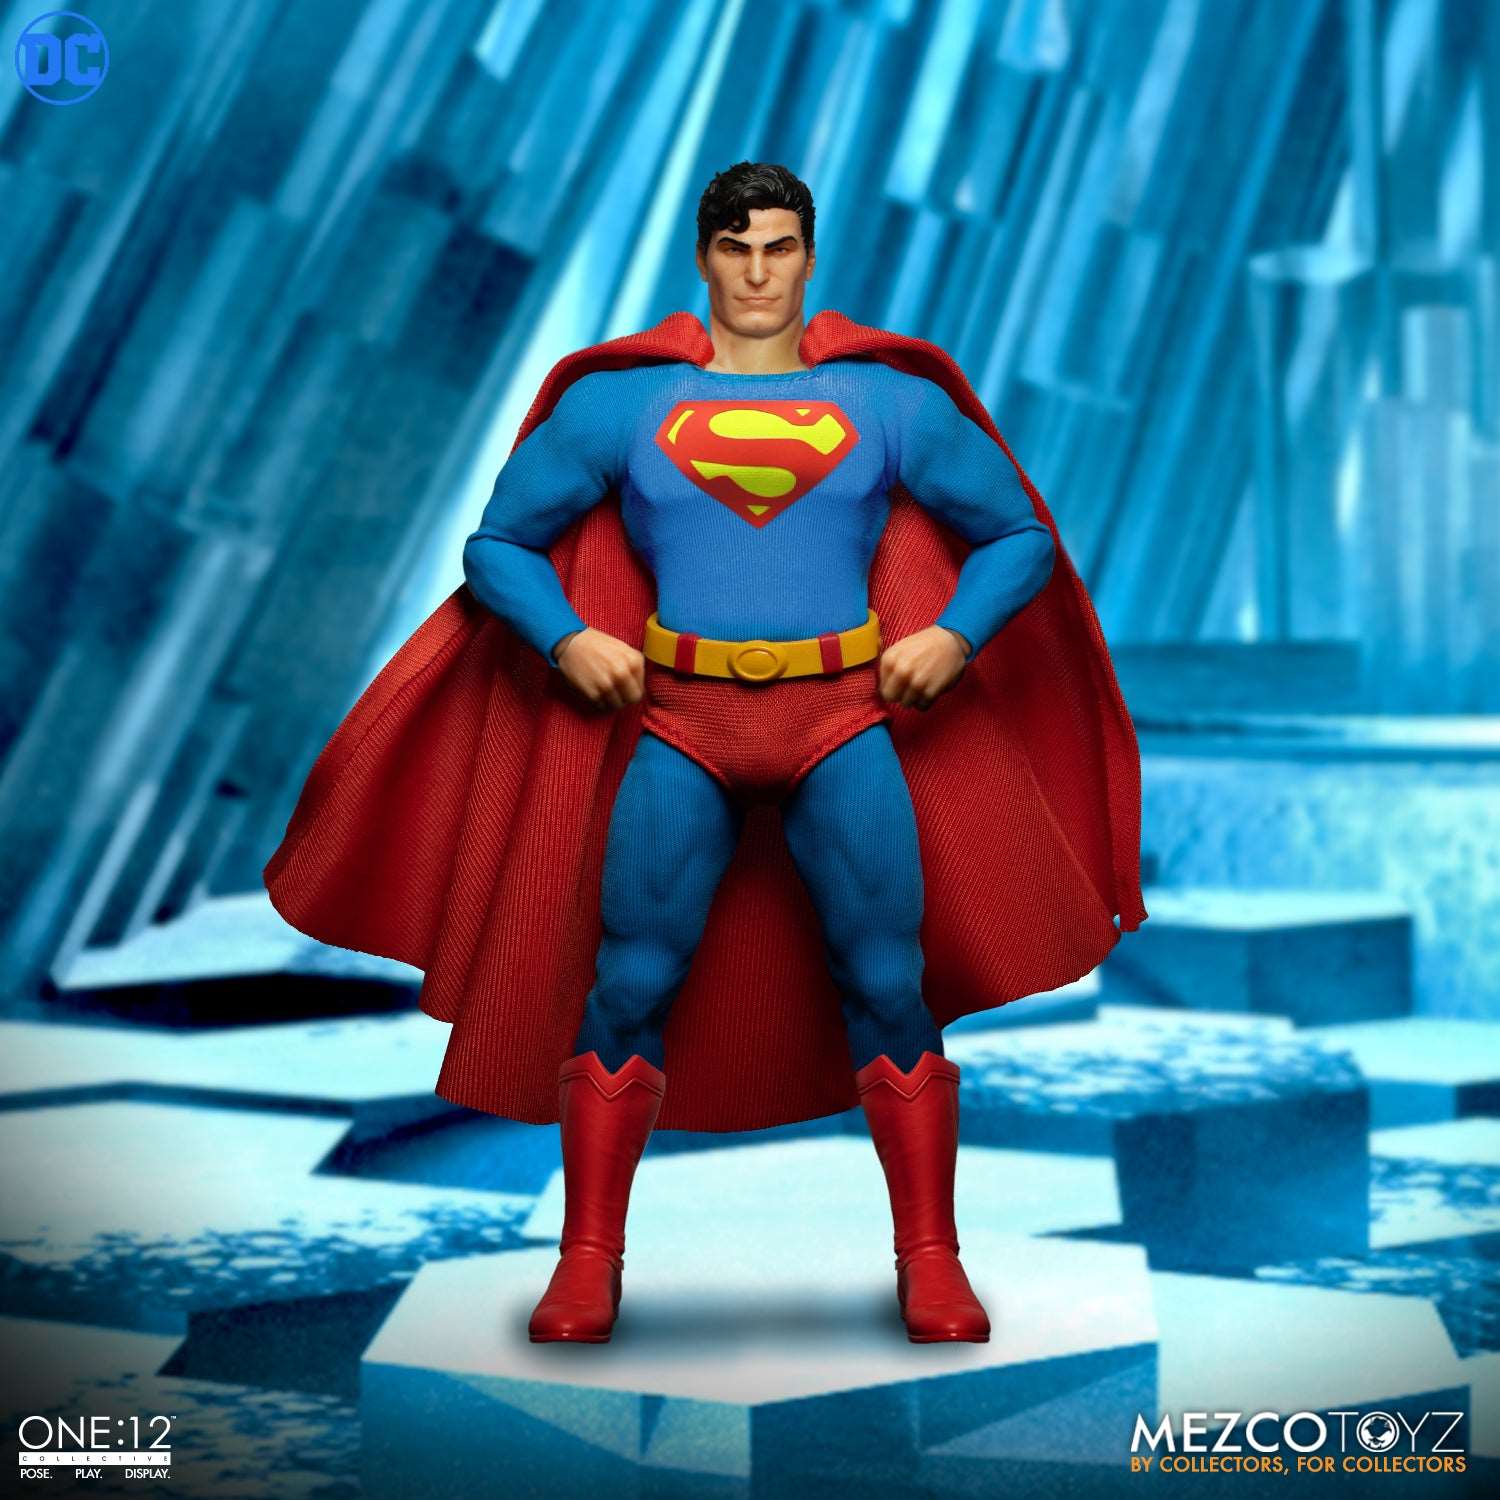 SS will be definitely be doing a Christopher Reeve Superman! 4/20 - Page 10  - Statue Forum